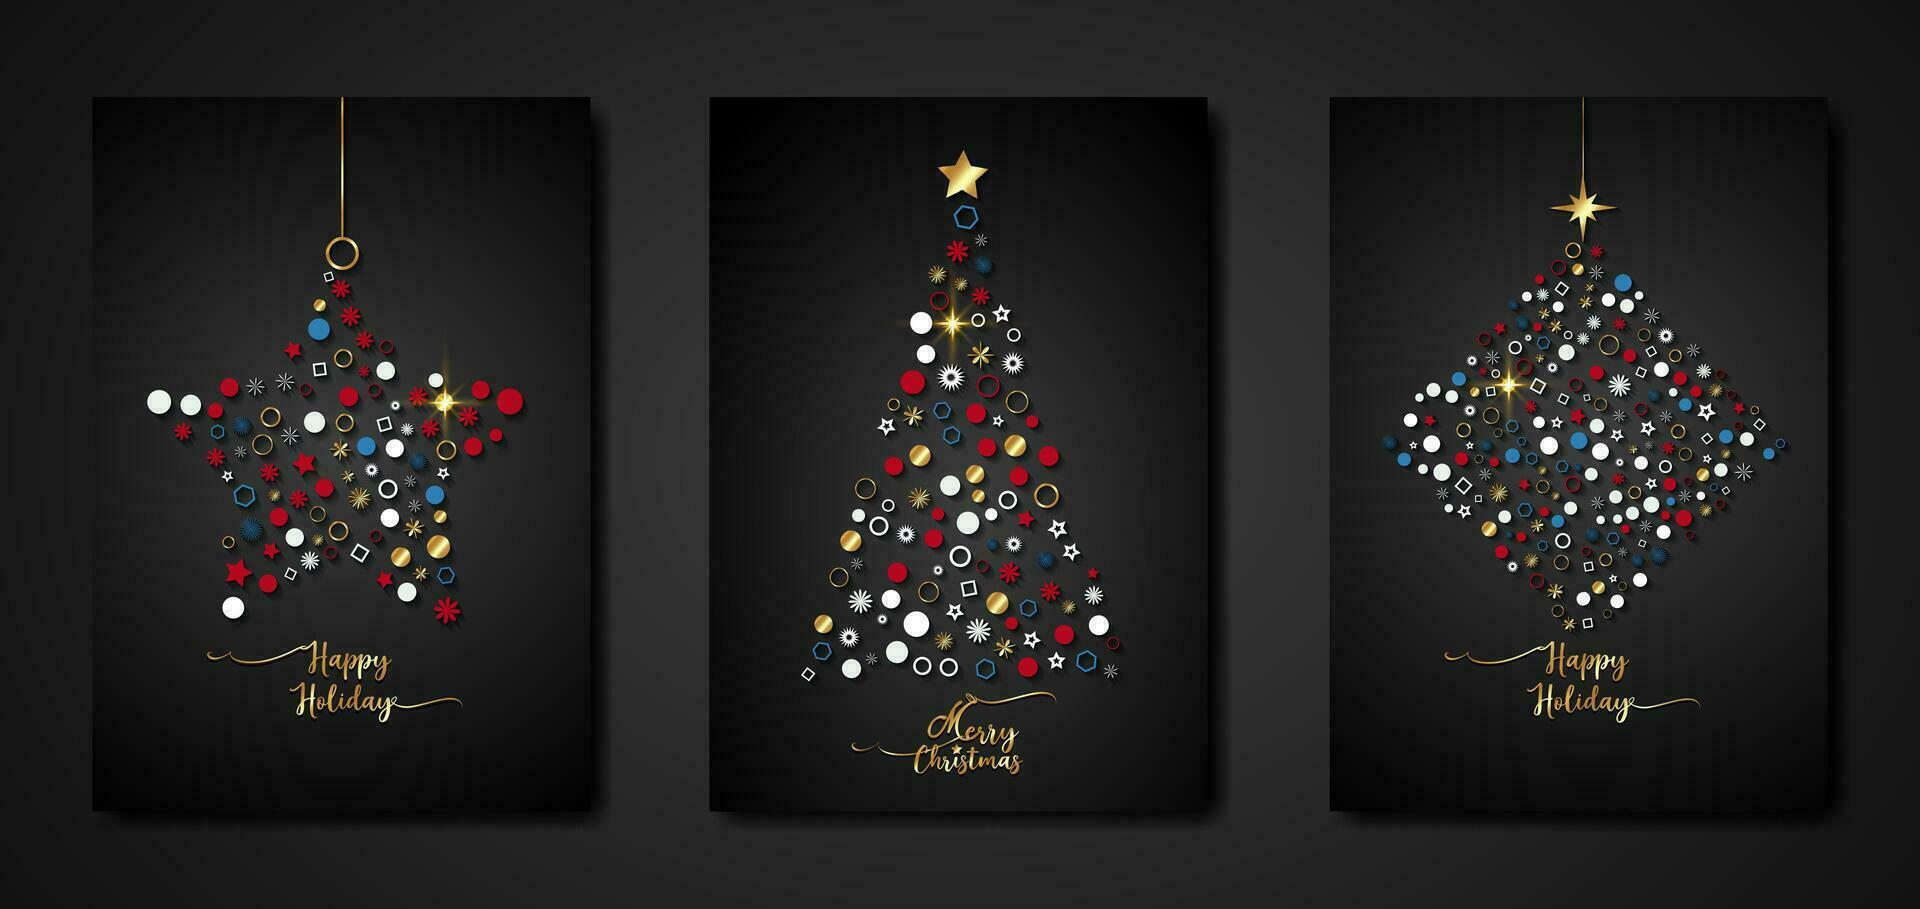 Set black card of Merry Christmas and Happy Holiday, greeting cards, posters, New Year covers. Design templates with typography, season wishes in colorful minimalist style for web, social media, print vector